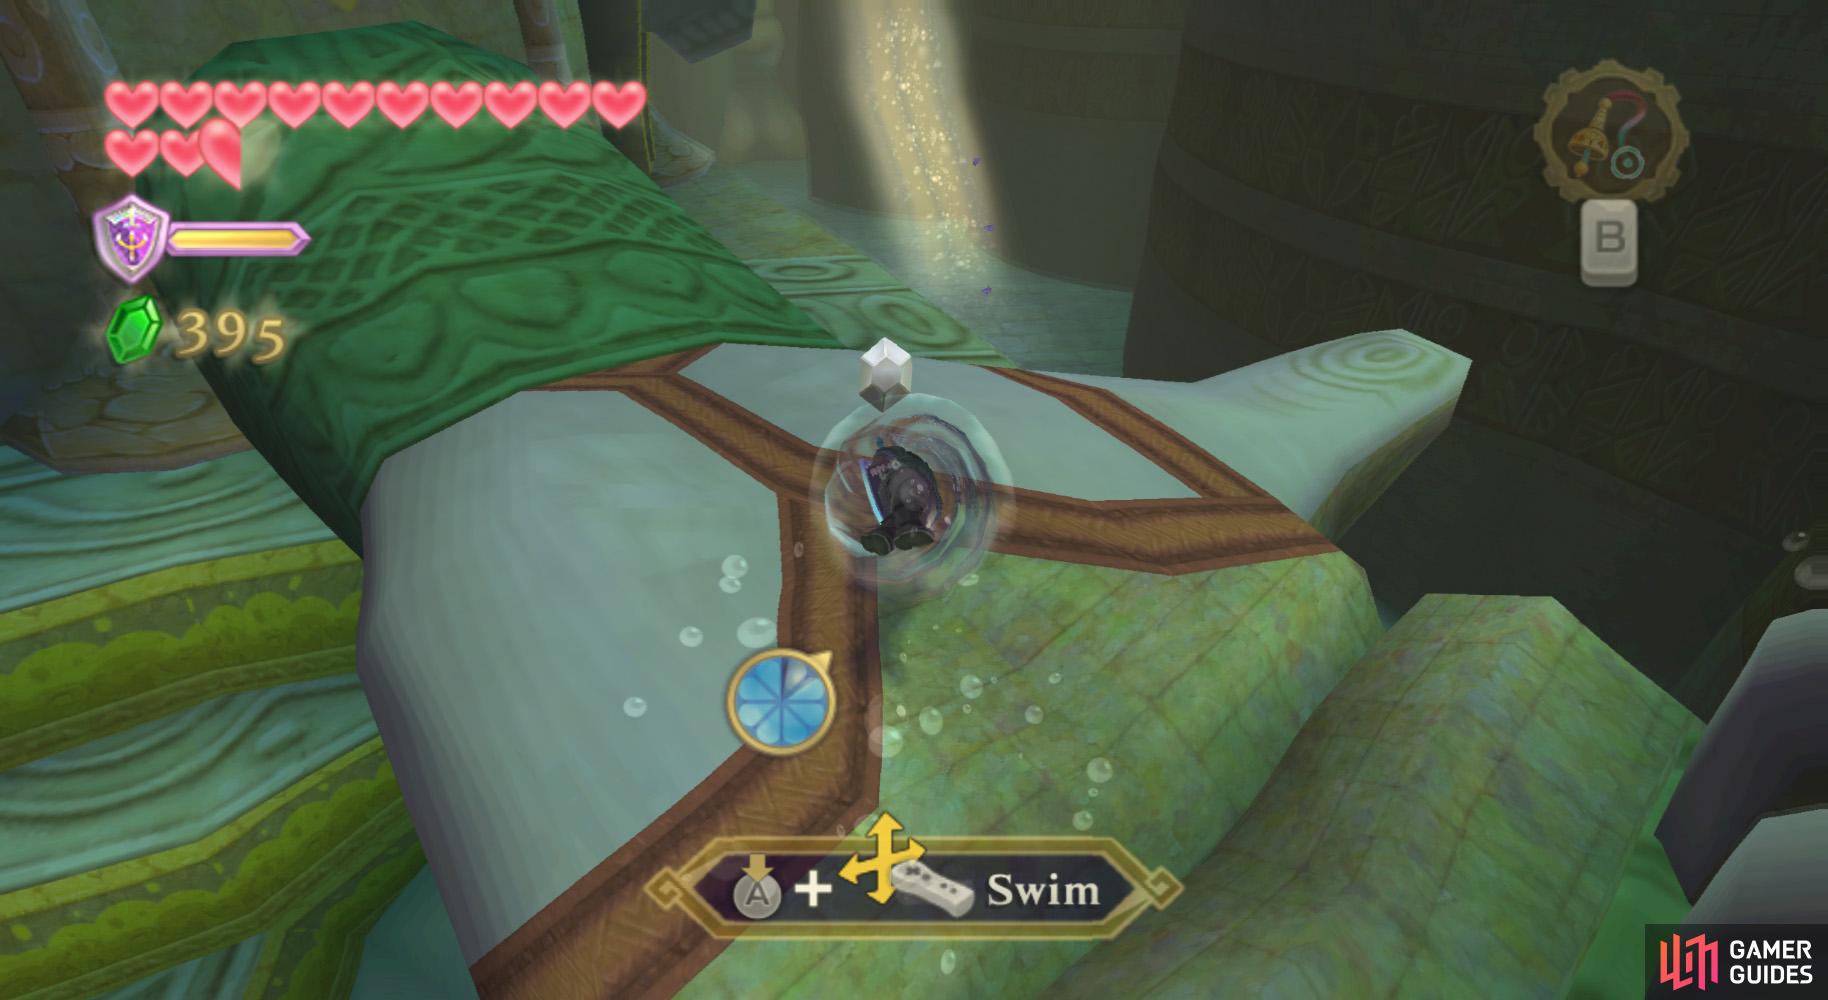 When you've got some free time, use a spin attack to collect the Silver Rupees in the first area without being grabbed.